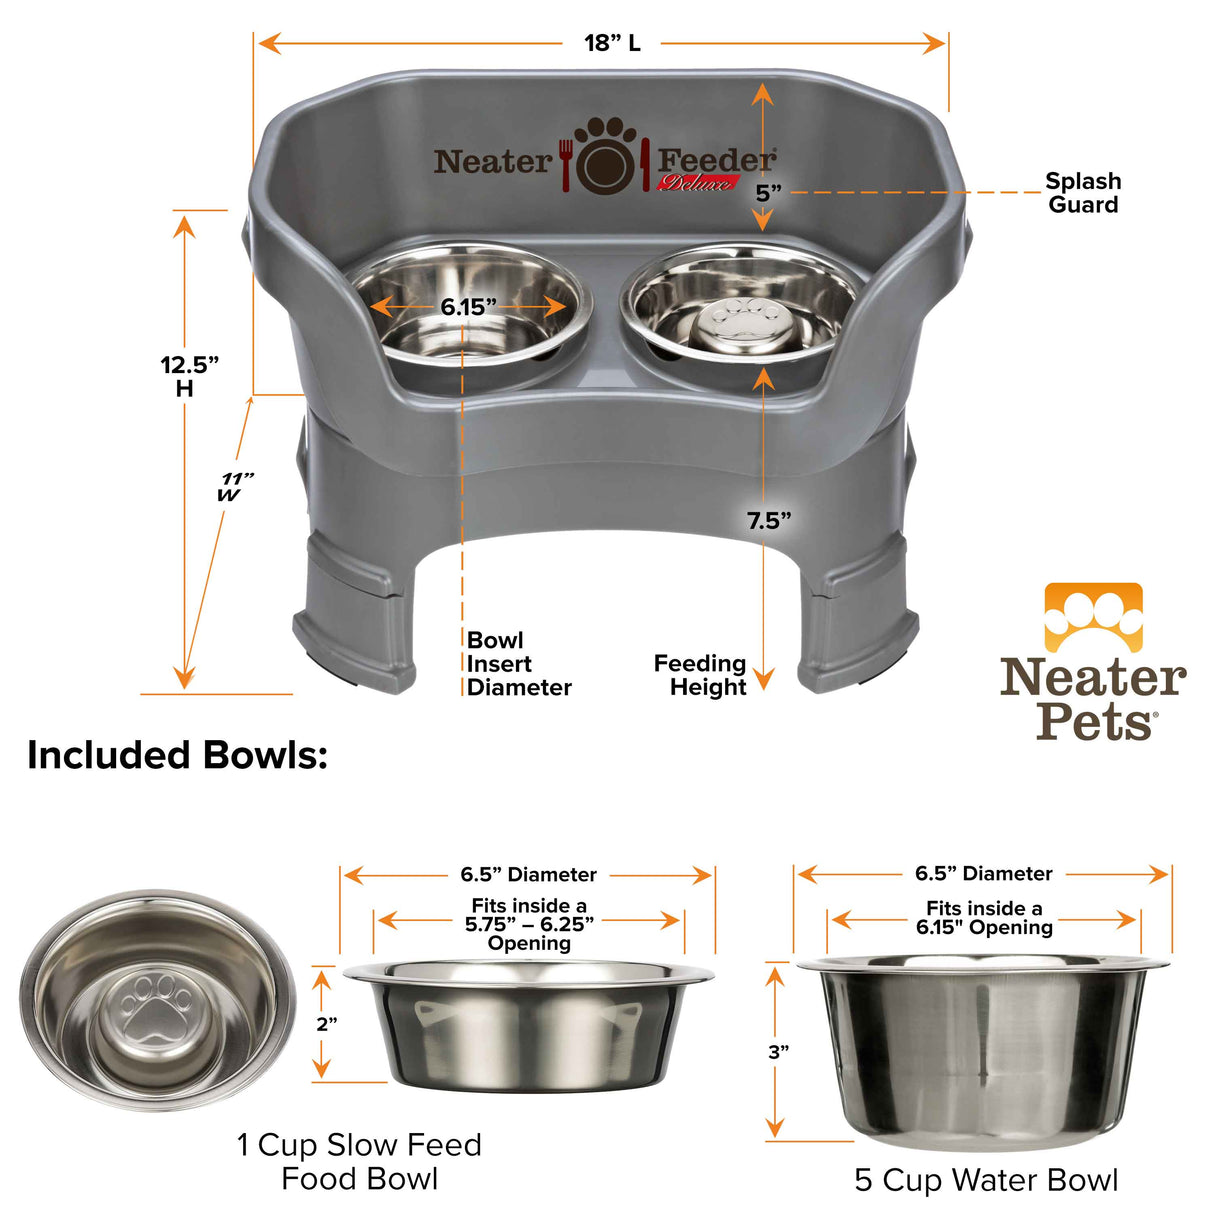 Dimensions of gunmetal gray medium DELUXE Neater Feeder with Stainless Steel Slow Feed Bowl with leg extensions